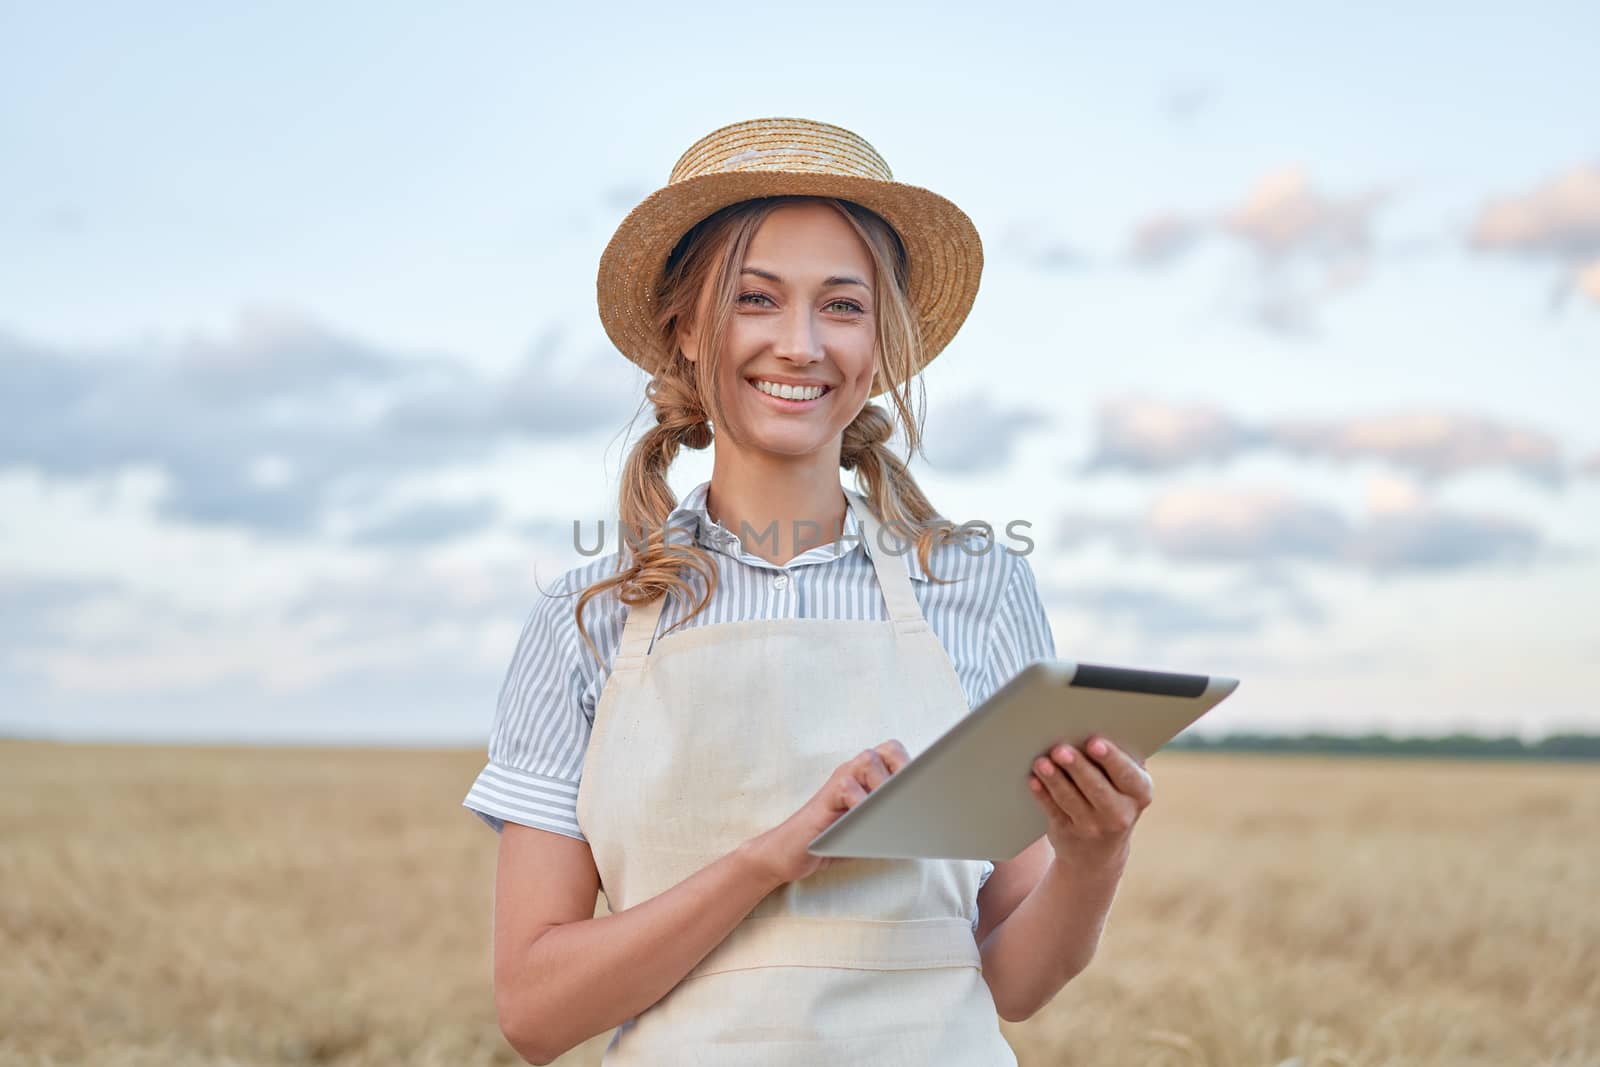 Woman farmer straw hat smart farming standing farmland smiling using digital tablet Female agronomist specialist research monitoring analysis data agribusiness Caucasian worker agricultural field